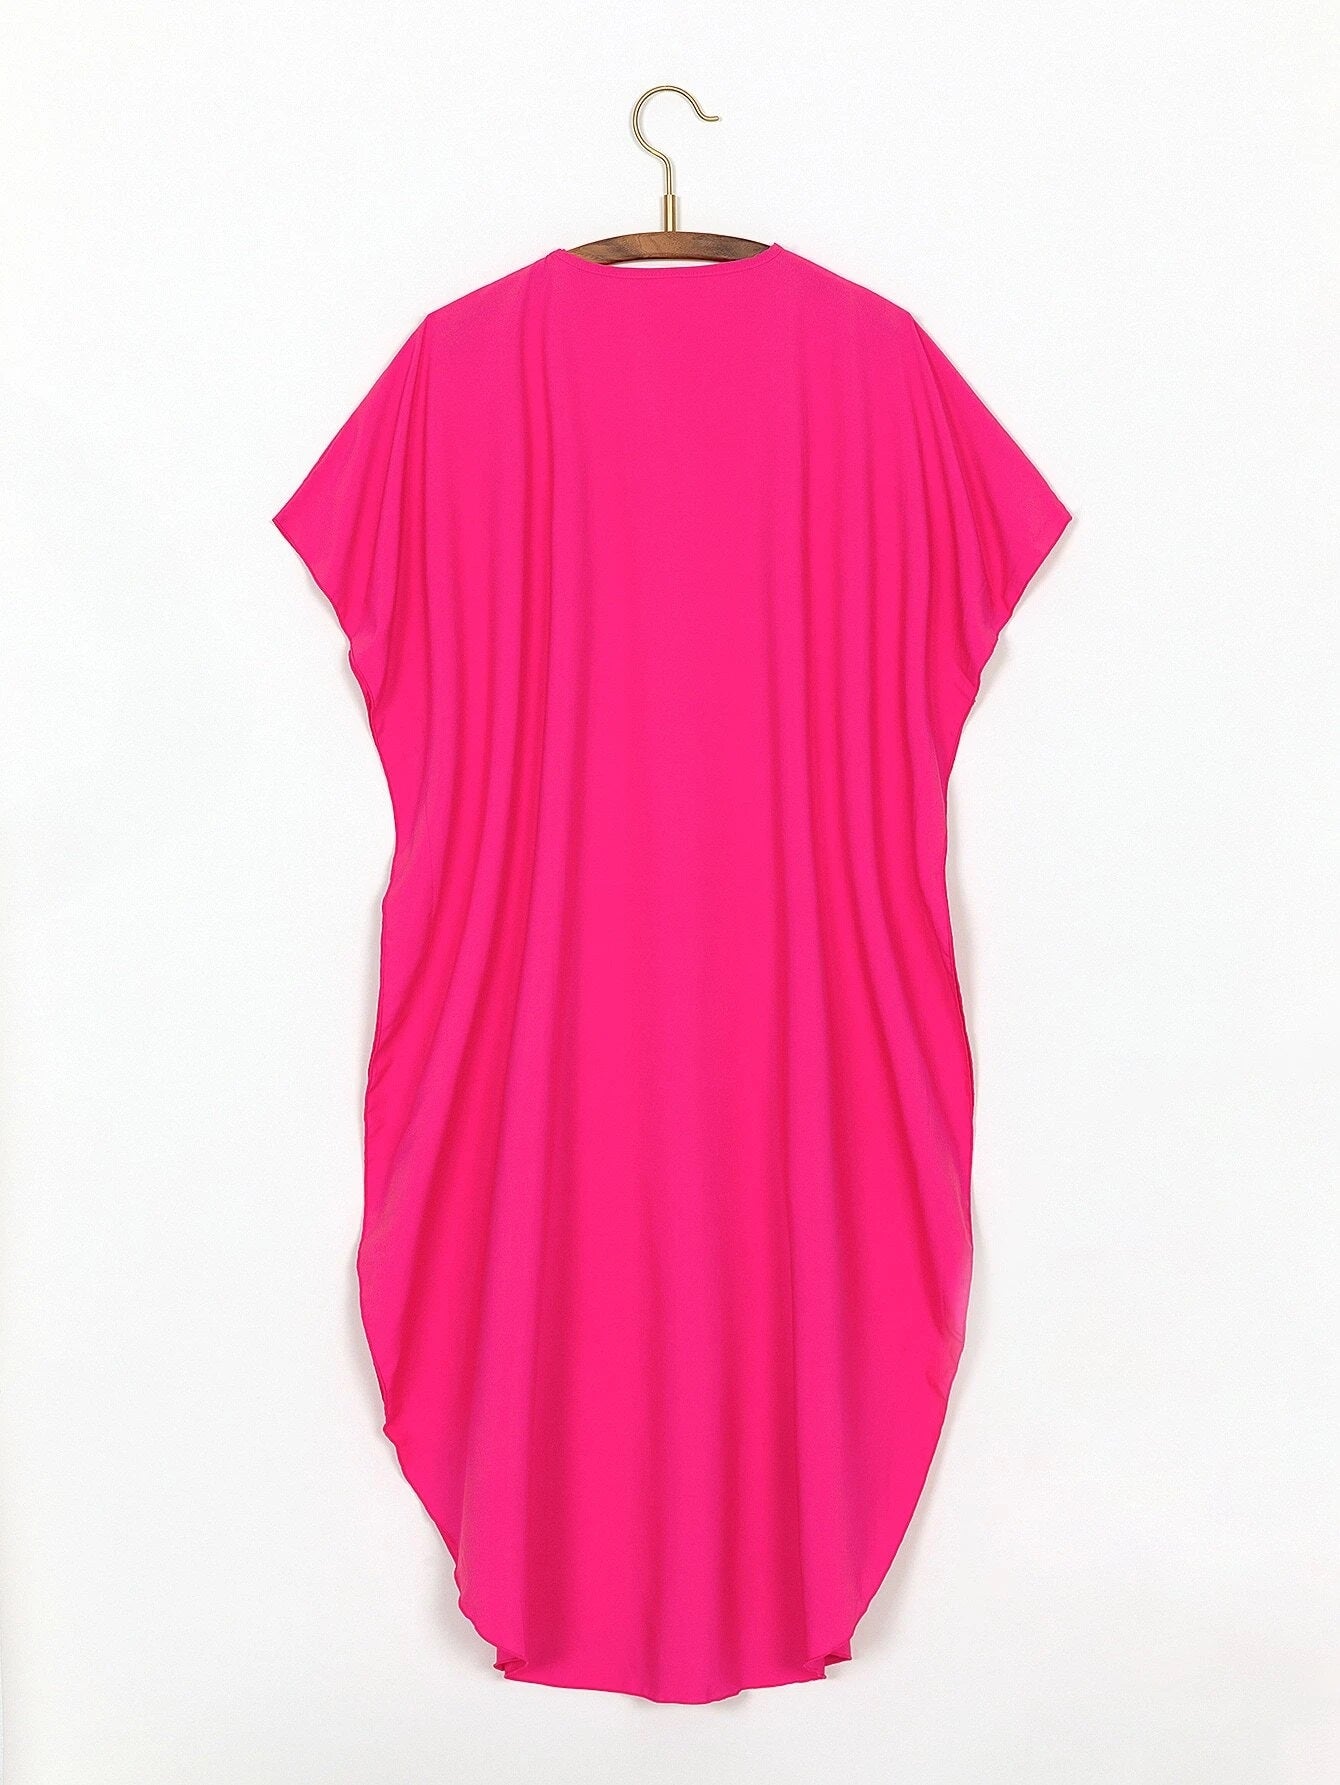 CM-SWS020381 Women Trendy Bohemian Style Solid Batwing Sleeve Cover Up Dress - Hot Pink